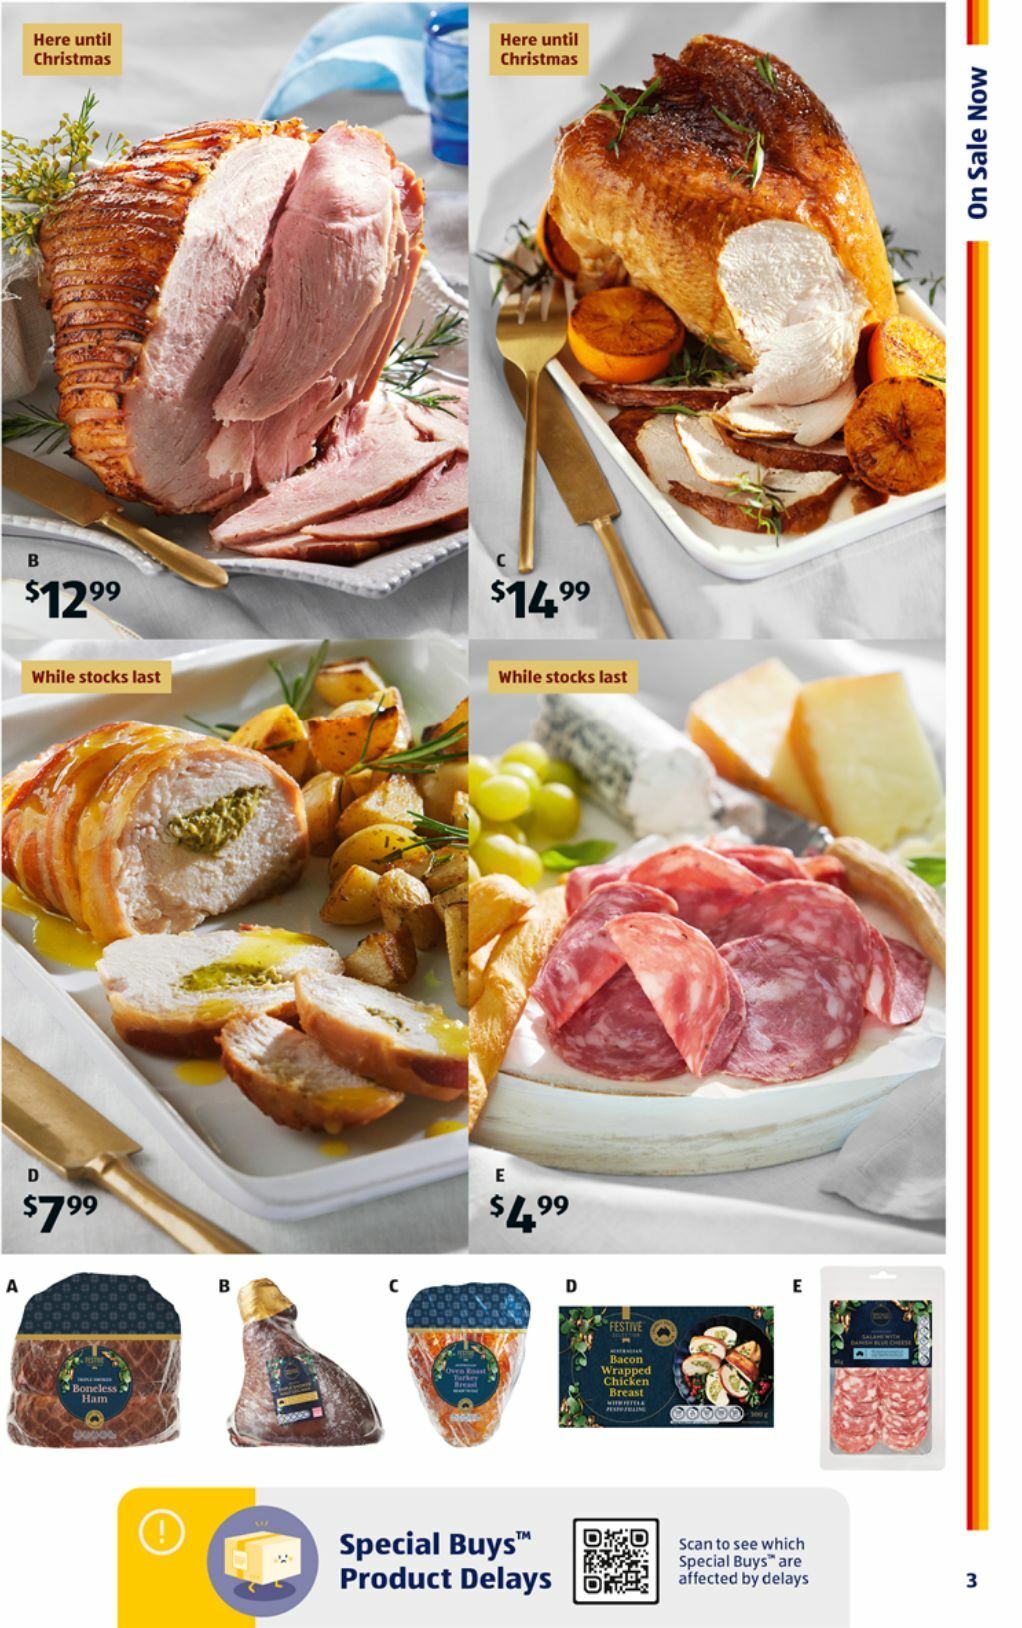 ALDI Catalogues from 16 November